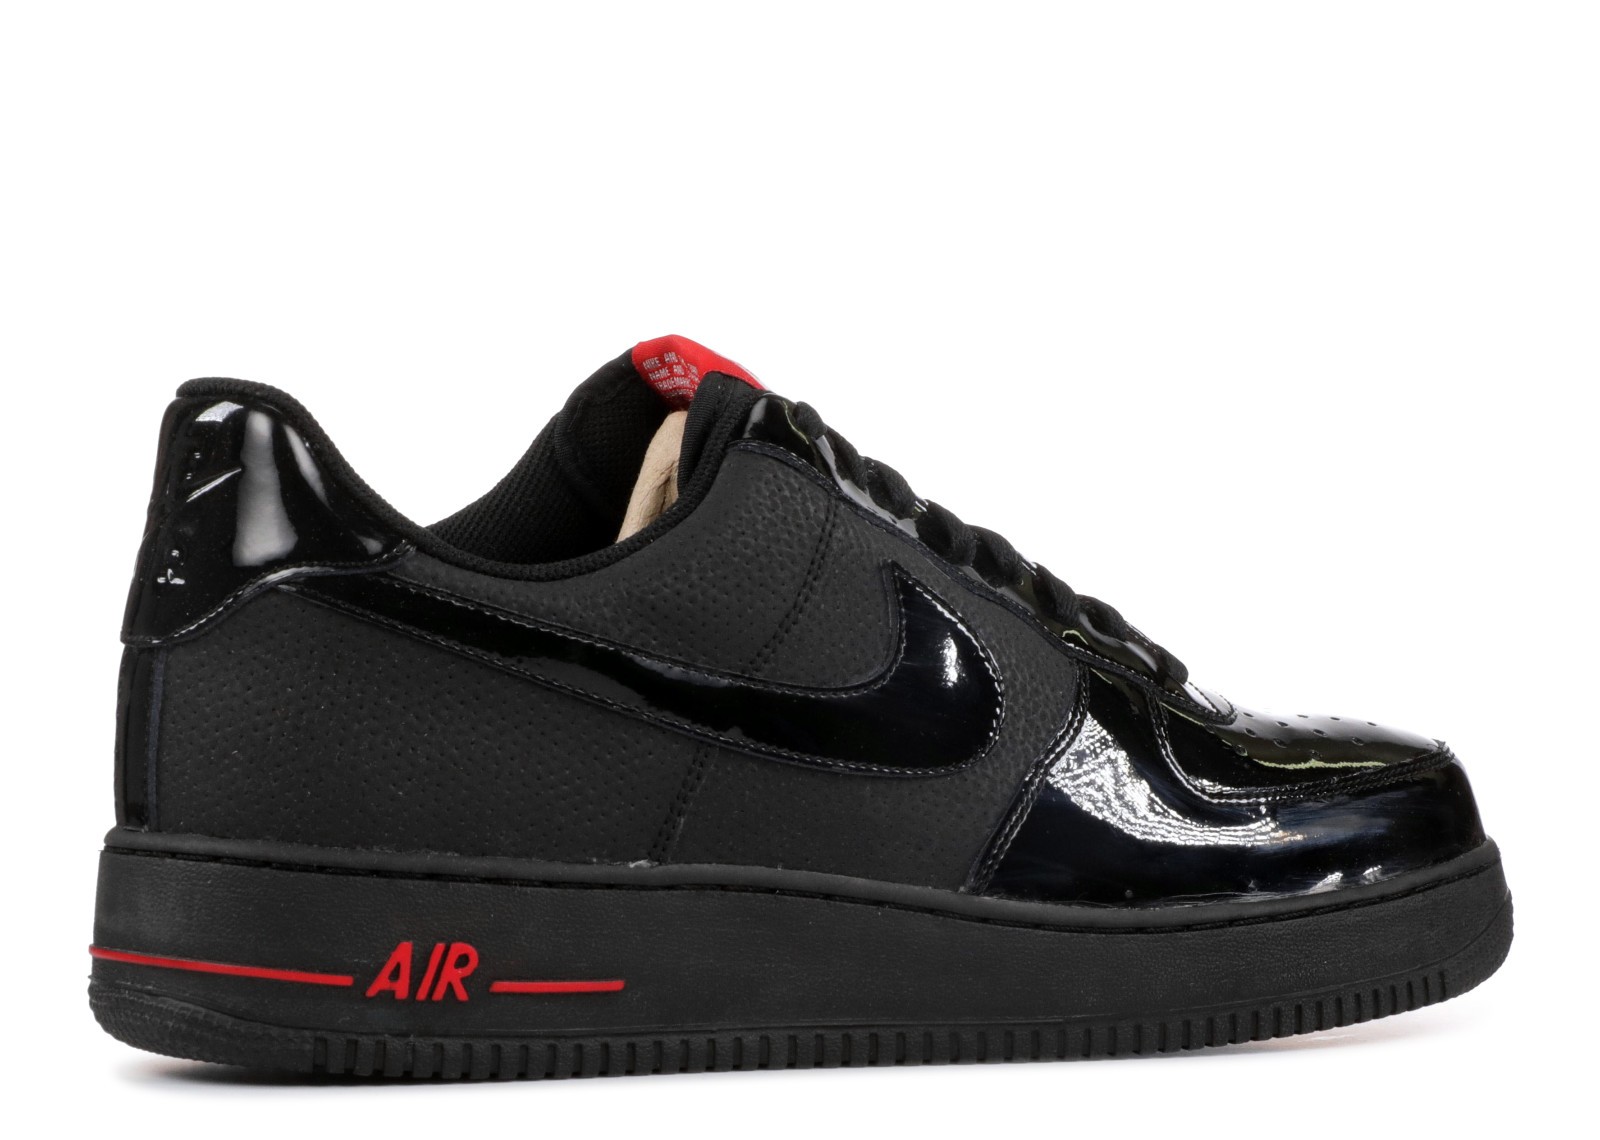 Nike Air Force 1 '07 Lv8 - Light Armory Blue / Gym Red-Summit